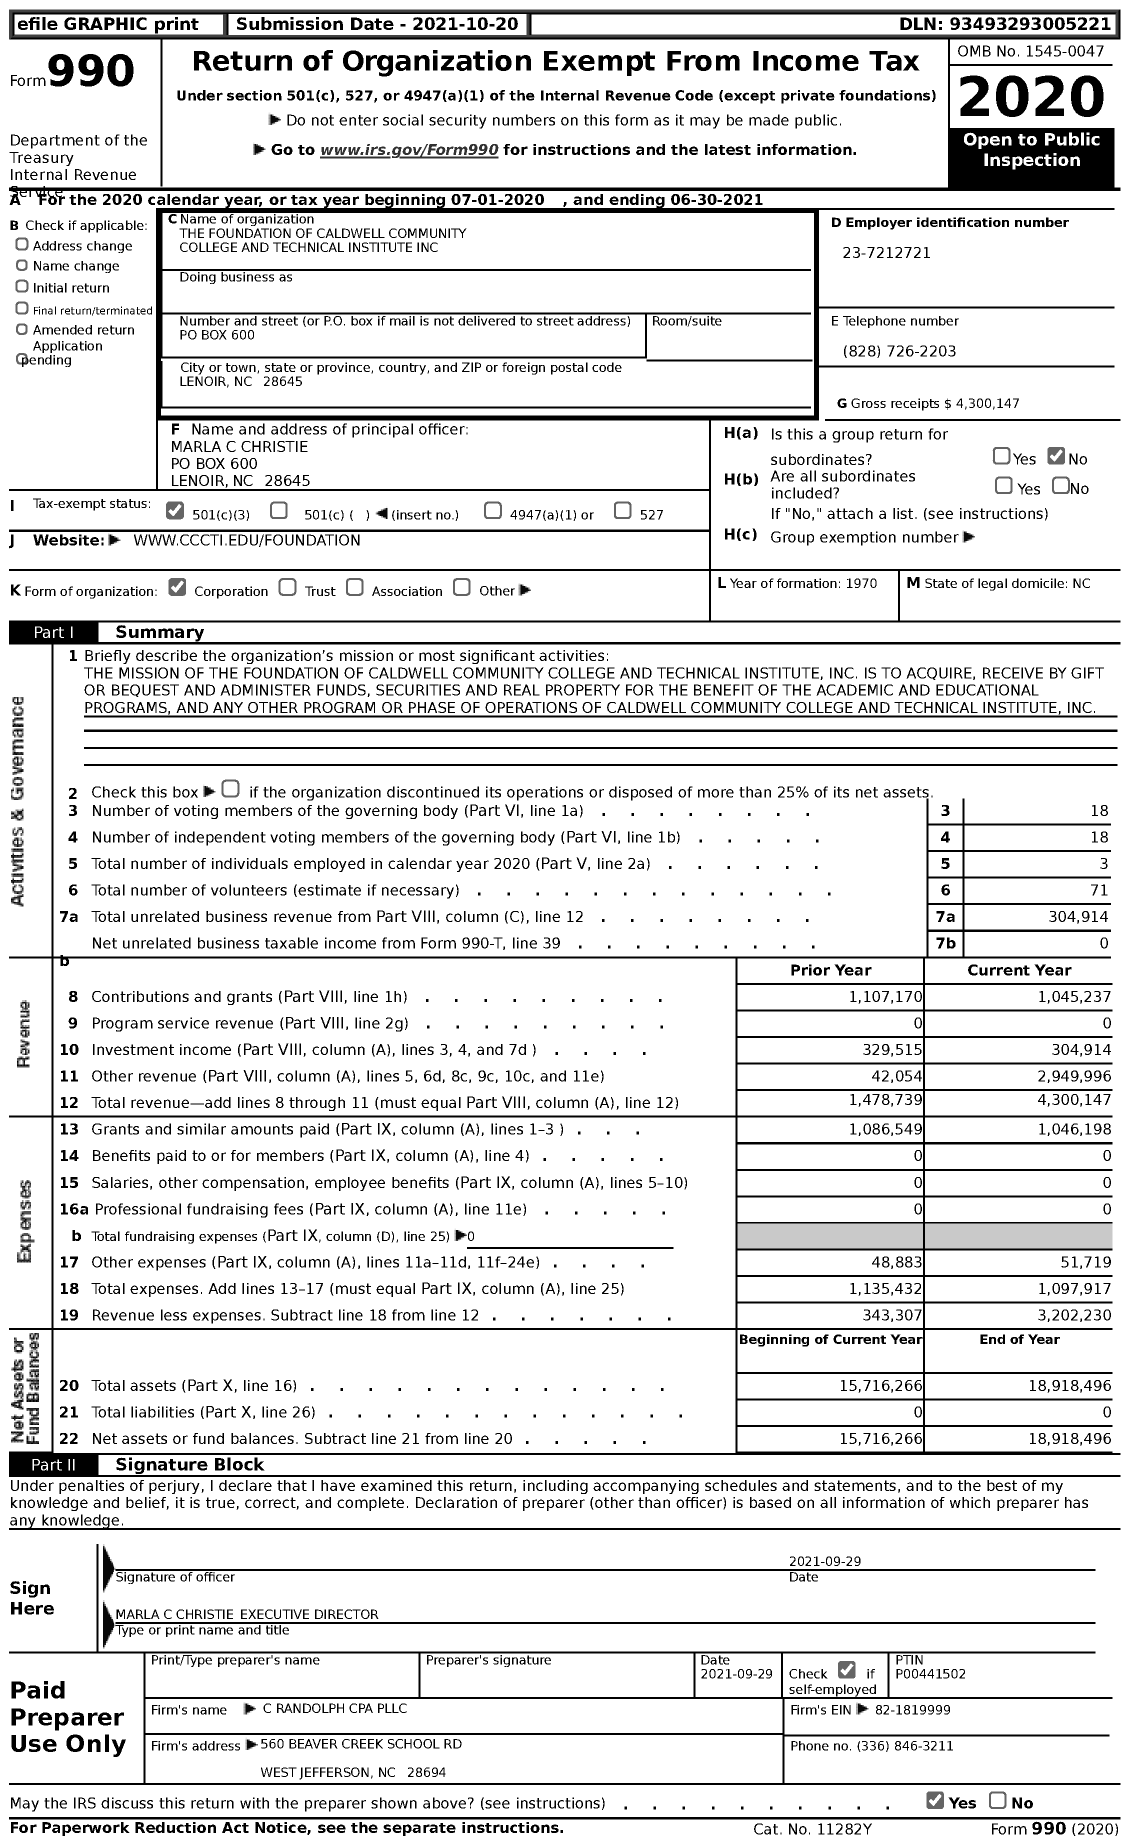 Image of first page of 2020 Form 990 for The Foundation of Caldwell Community College and Technical Institute